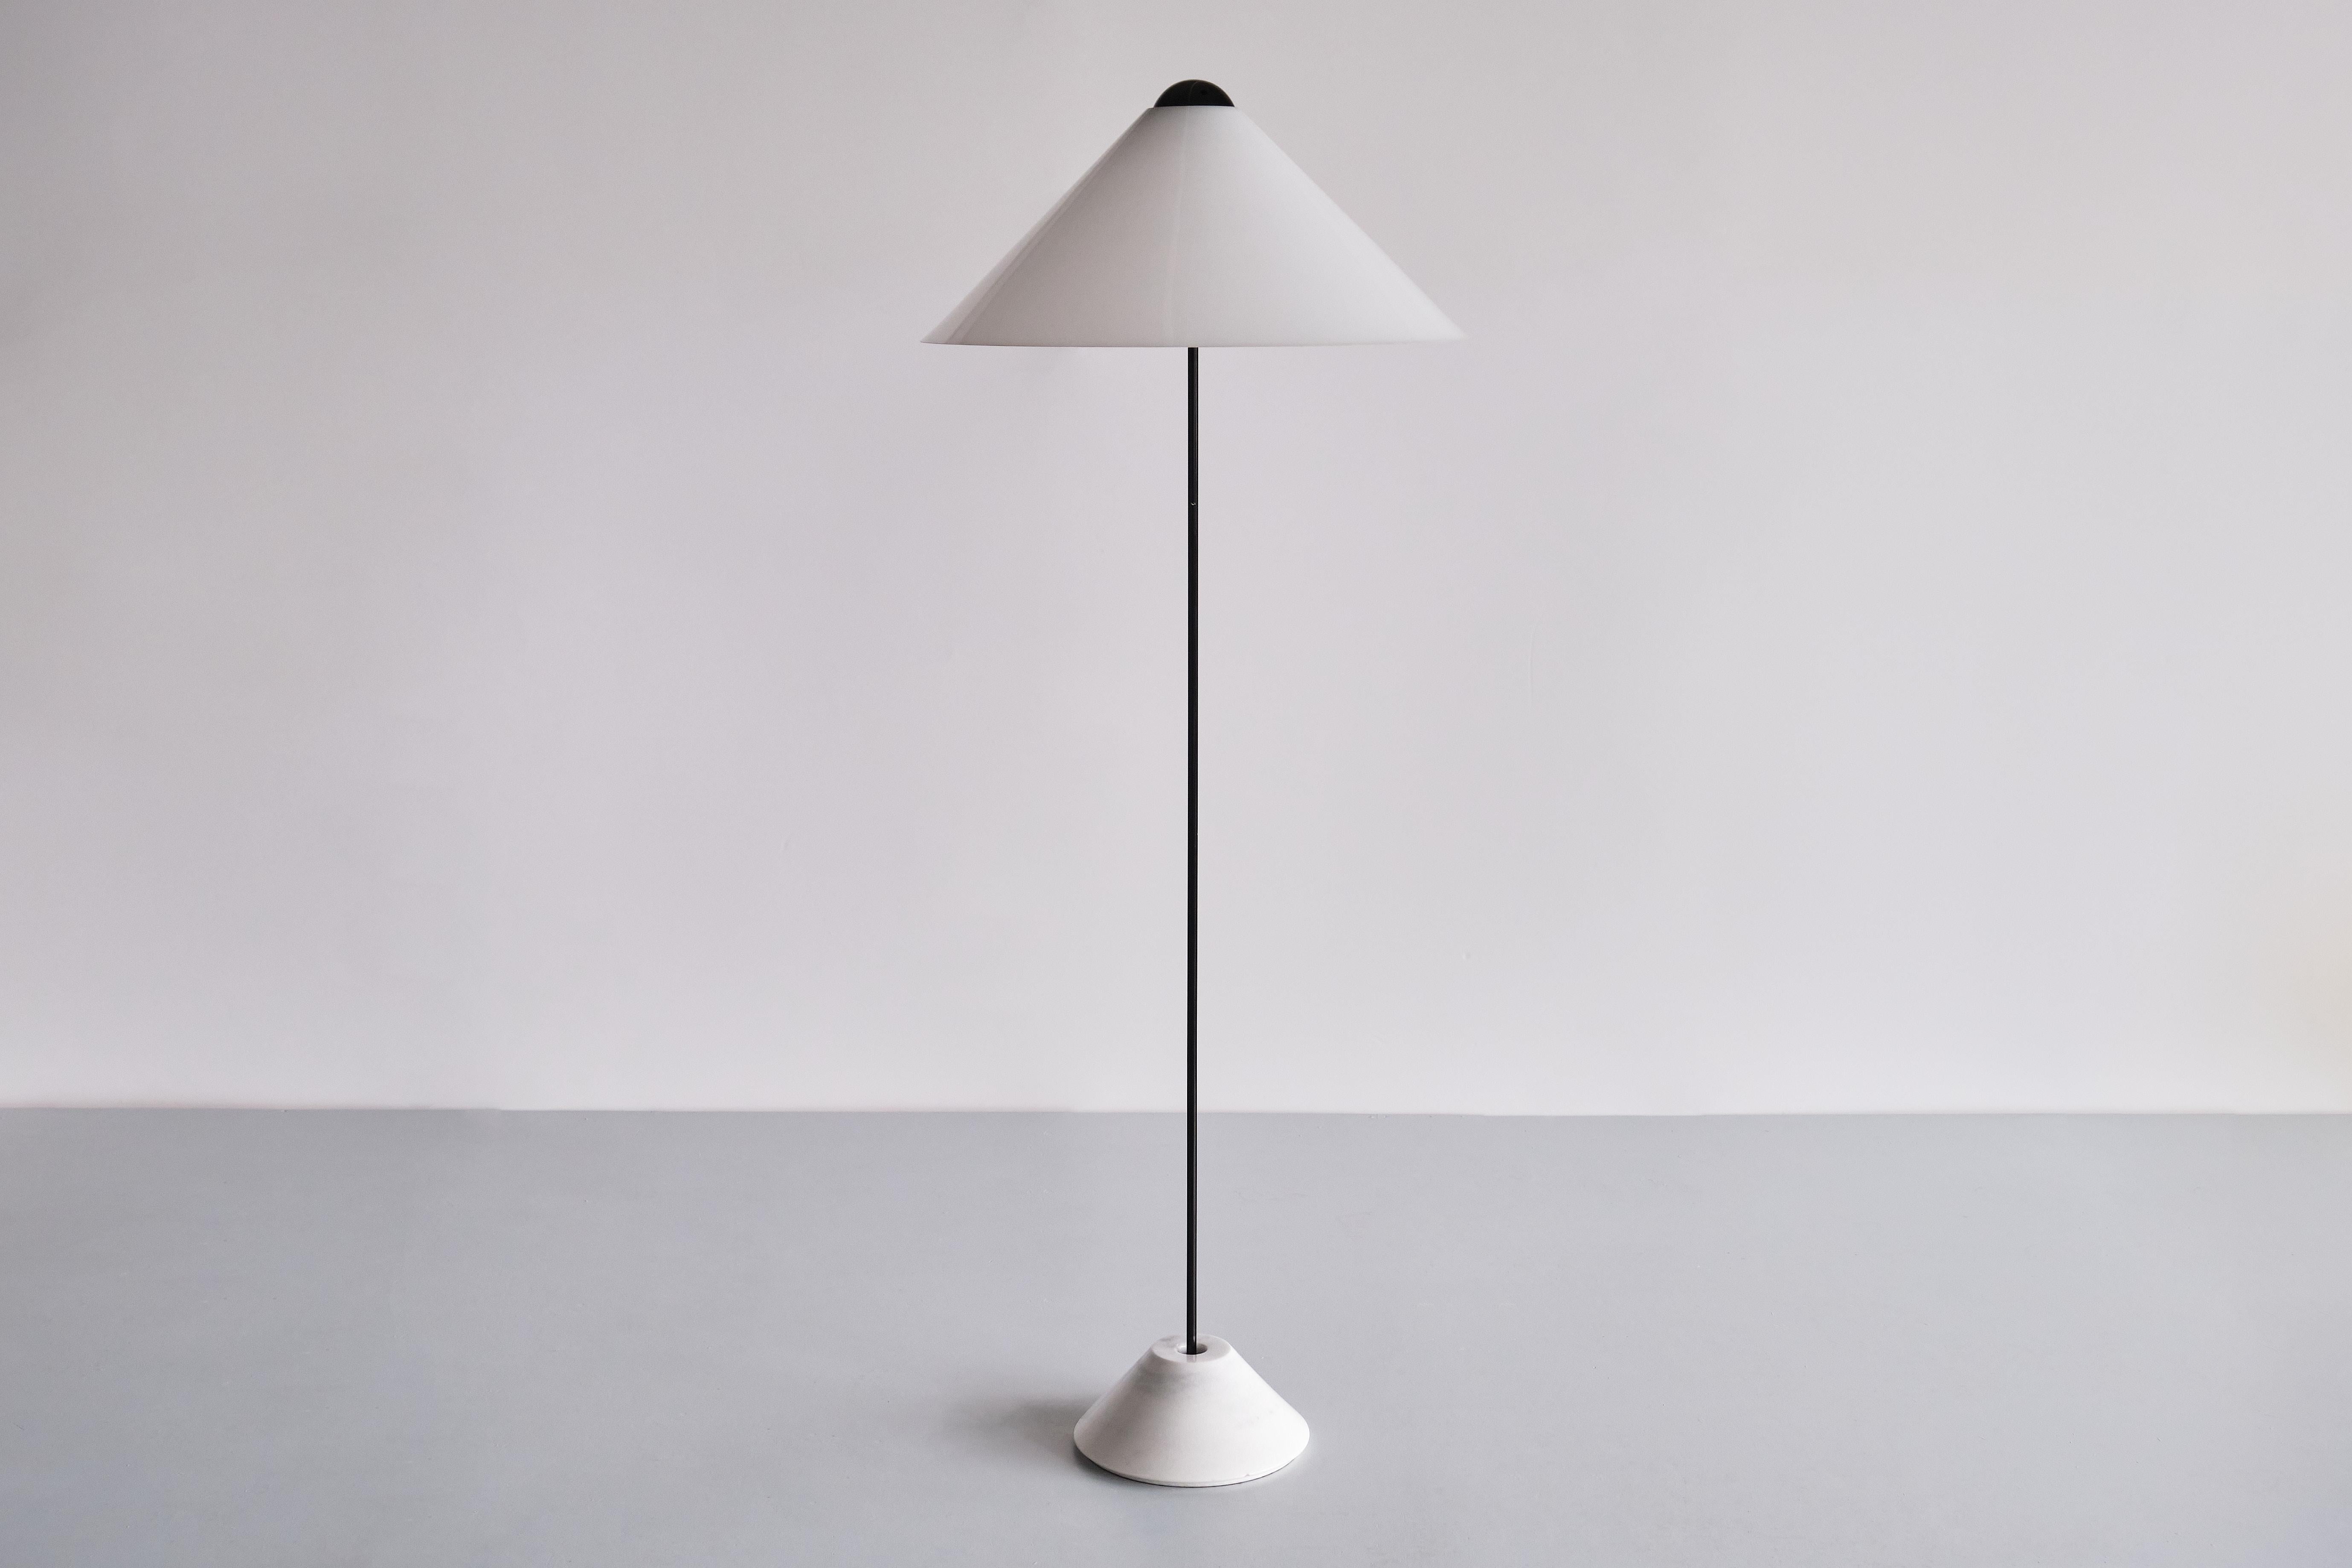 Vico Magistretti 'Snow' Floor Lamp in Metal and Marble, Oluce, Italy, 1973 For Sale 3